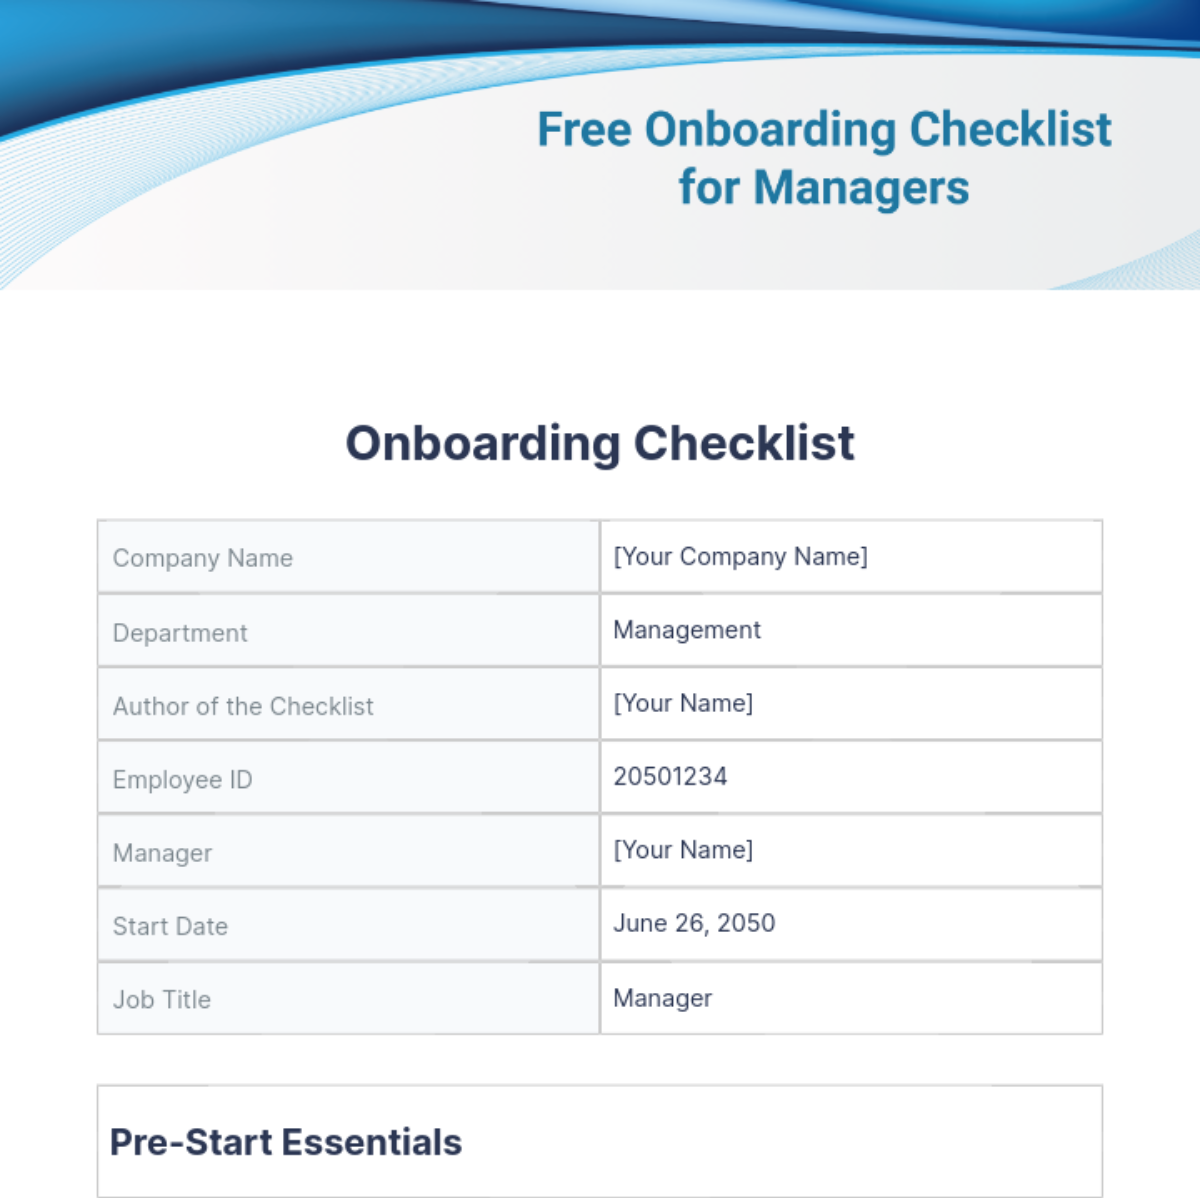 Free Onboarding Checklist for Managers Template